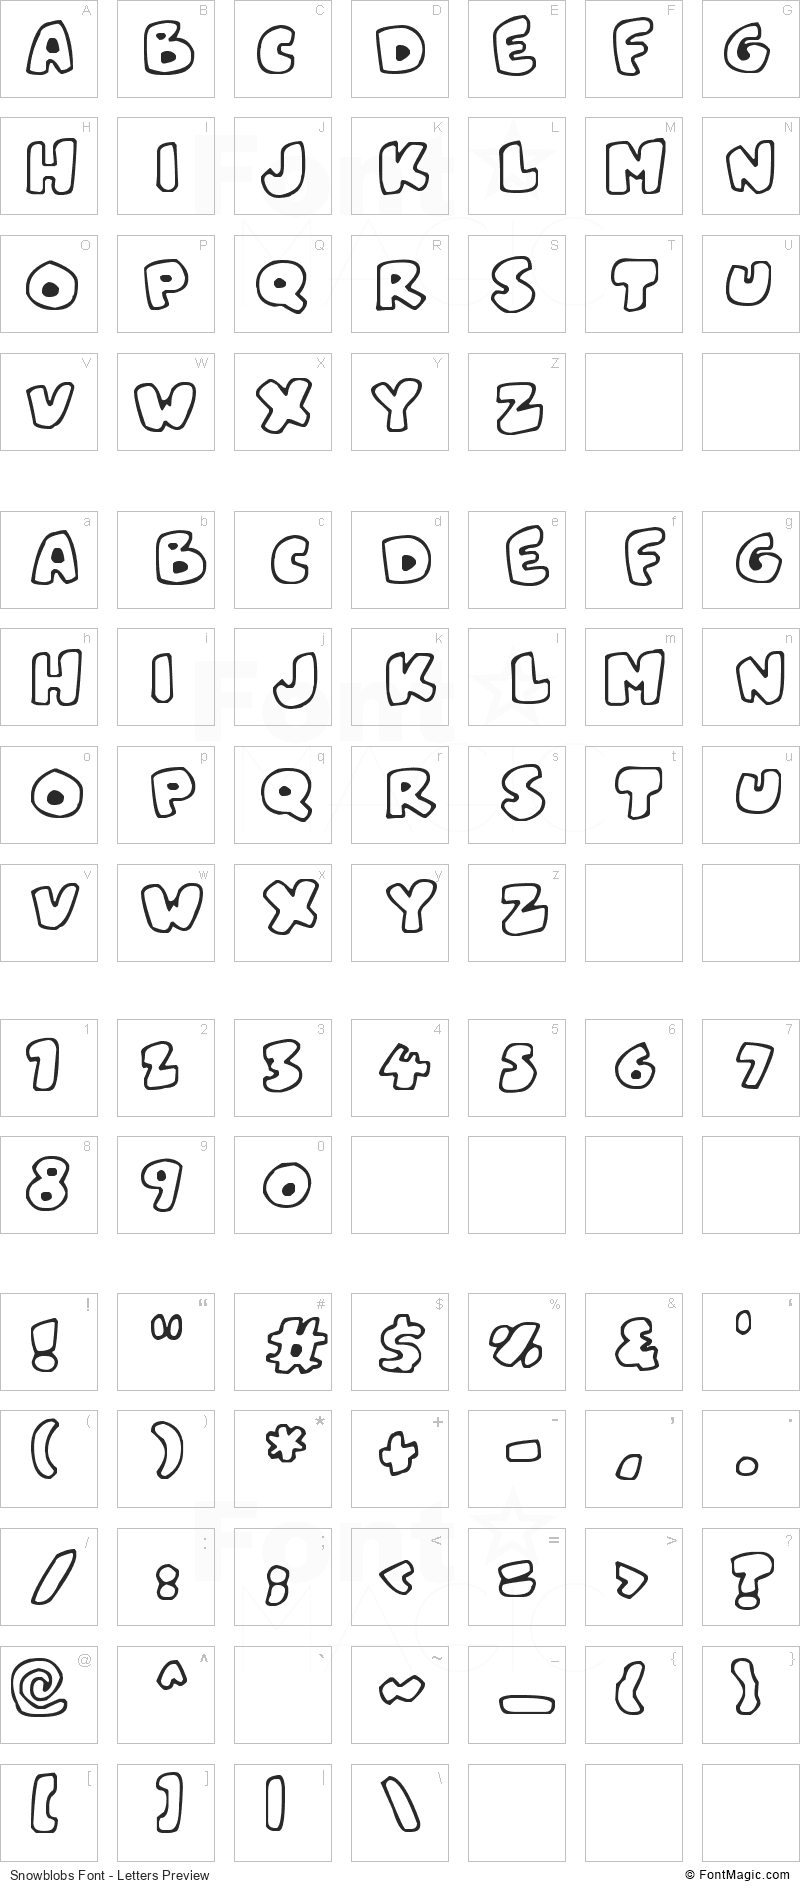 Snowblobs Font - All Latters Preview Chart